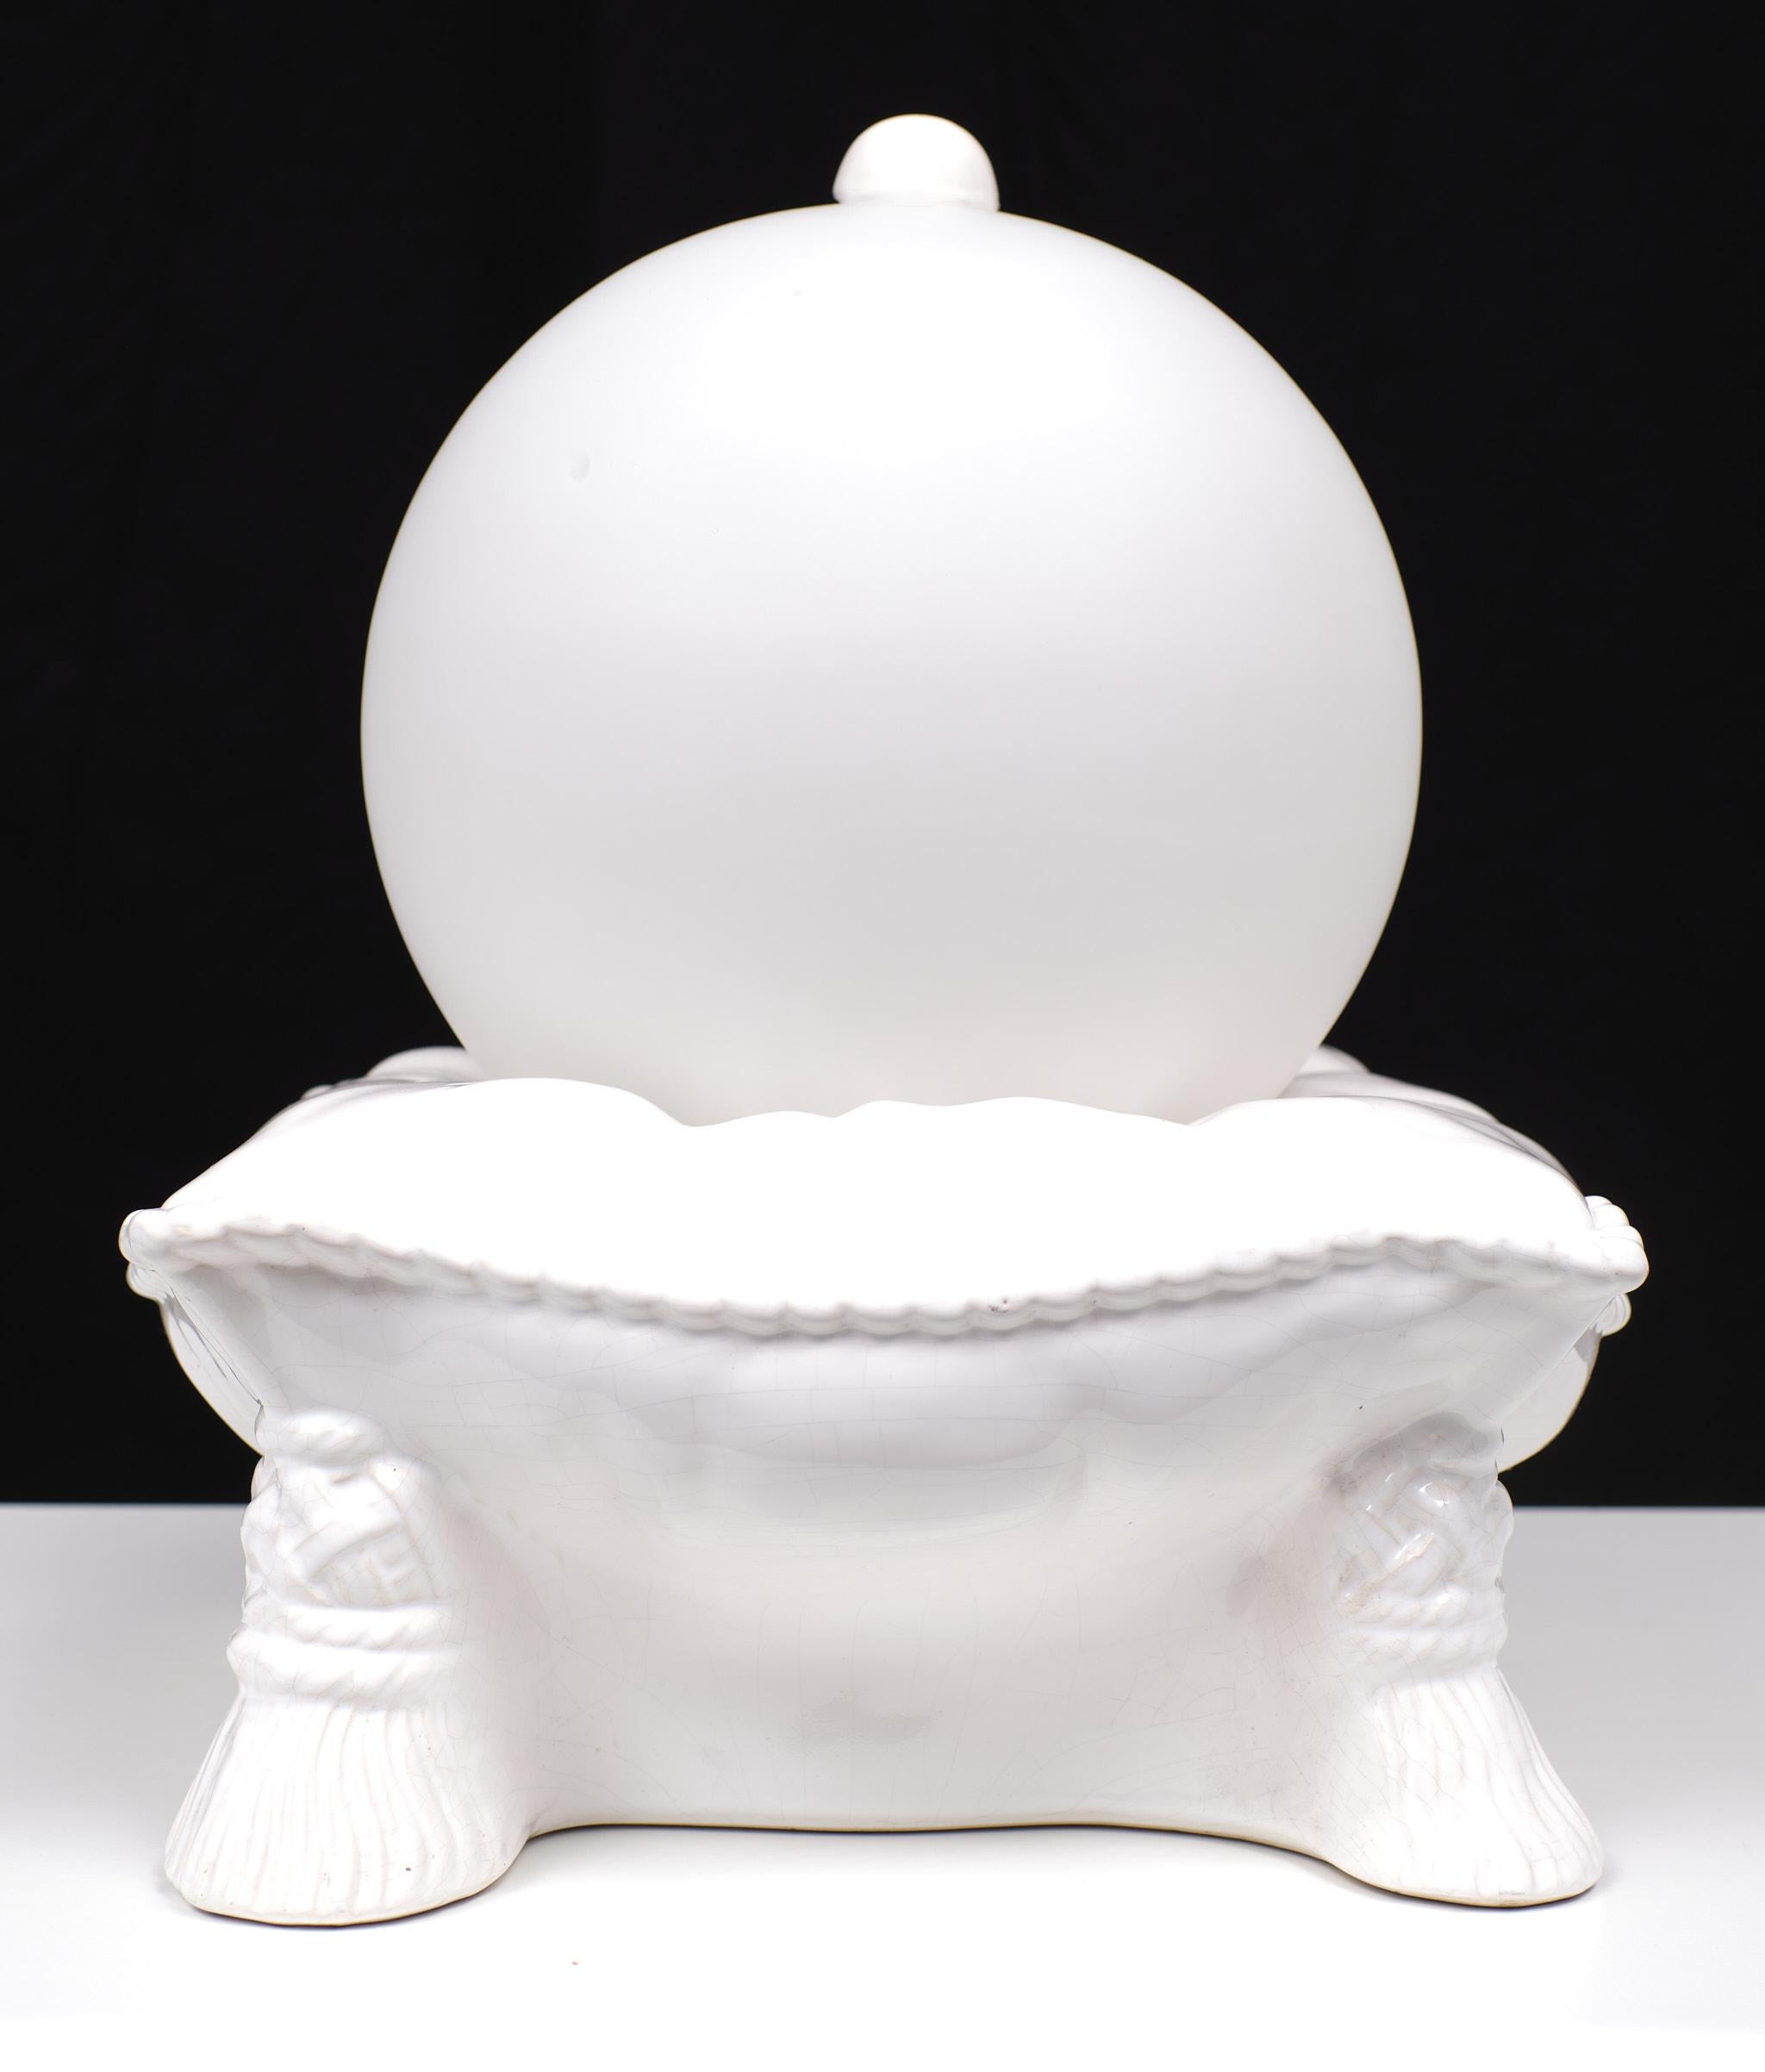 Love this very unusual Table lamp. White in the shape of a cushion Ceramic
base, comes with tassels on the corners. On top a Satin white Globe.
Unique piece.